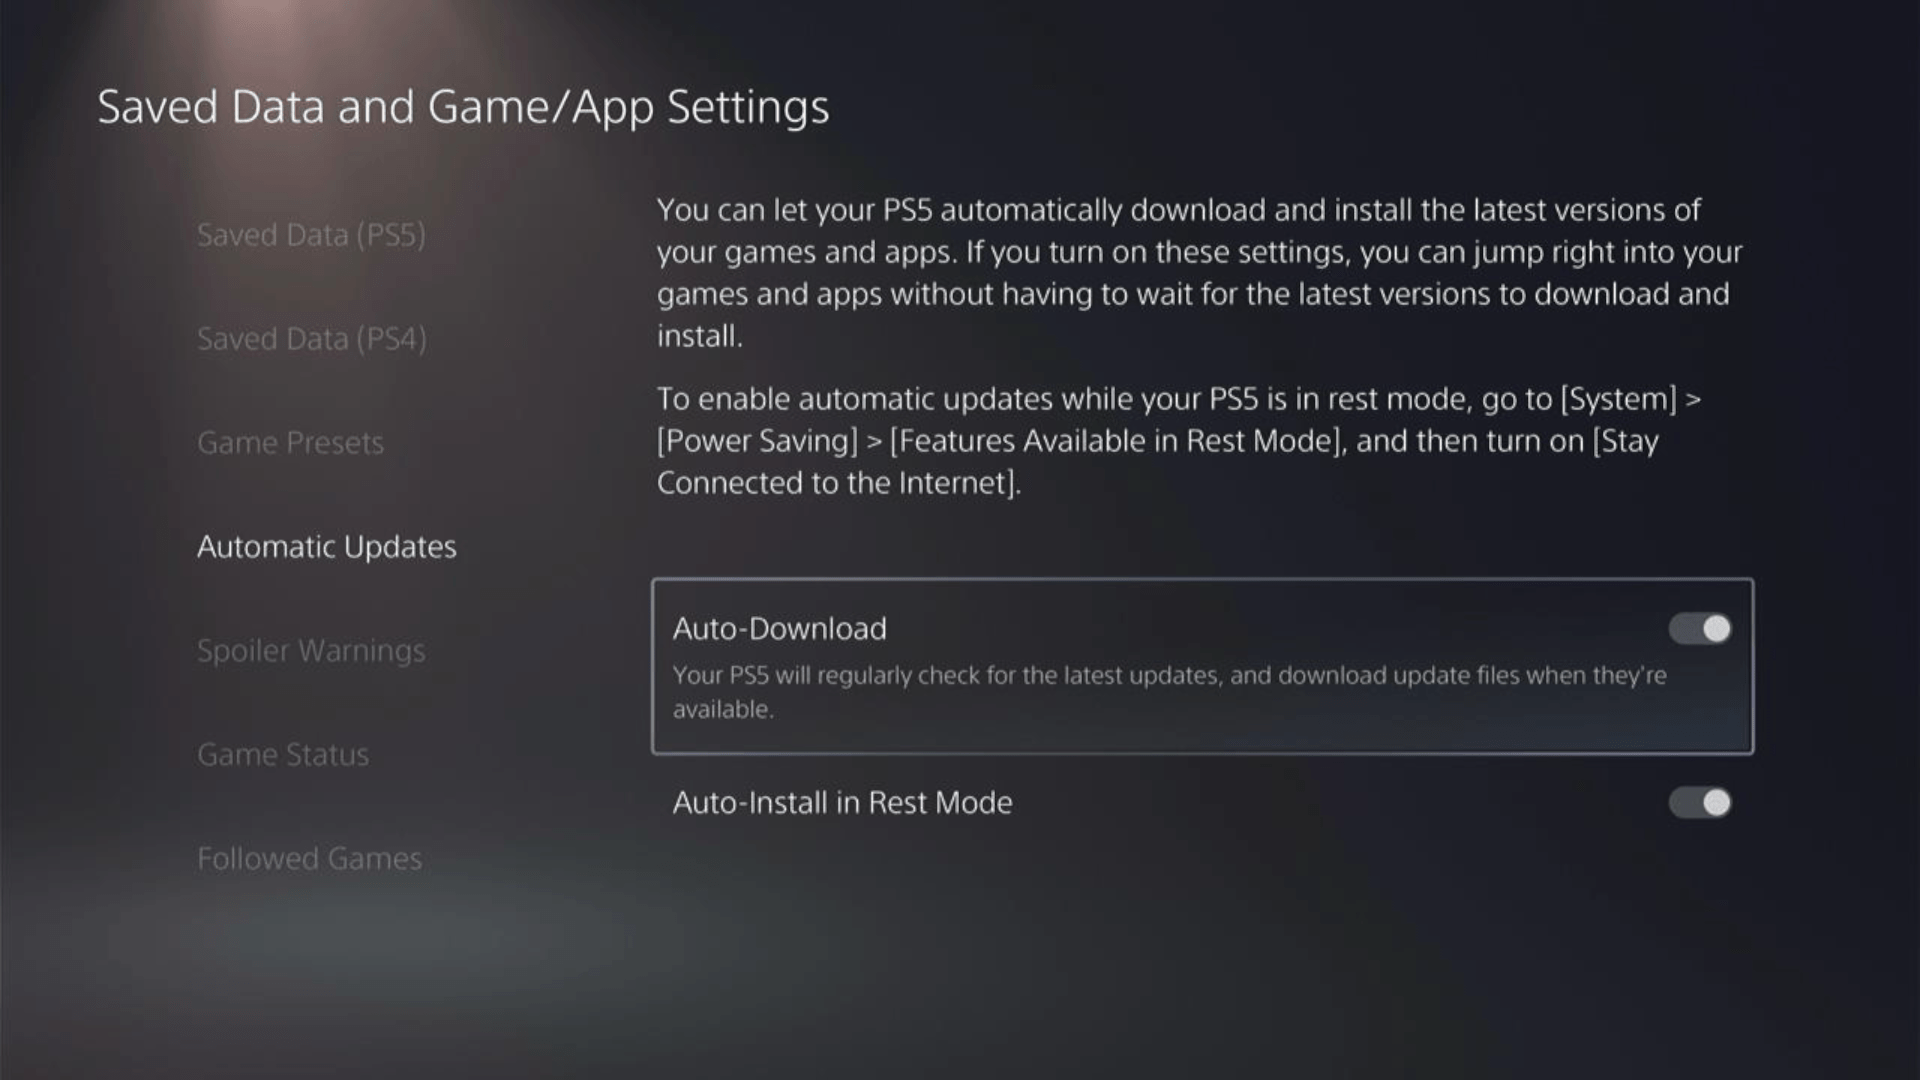 In the Saved Data and Game/App Settings window, select Automatic Updates from the left sidebar to enable automatic game updates to avoid locking up